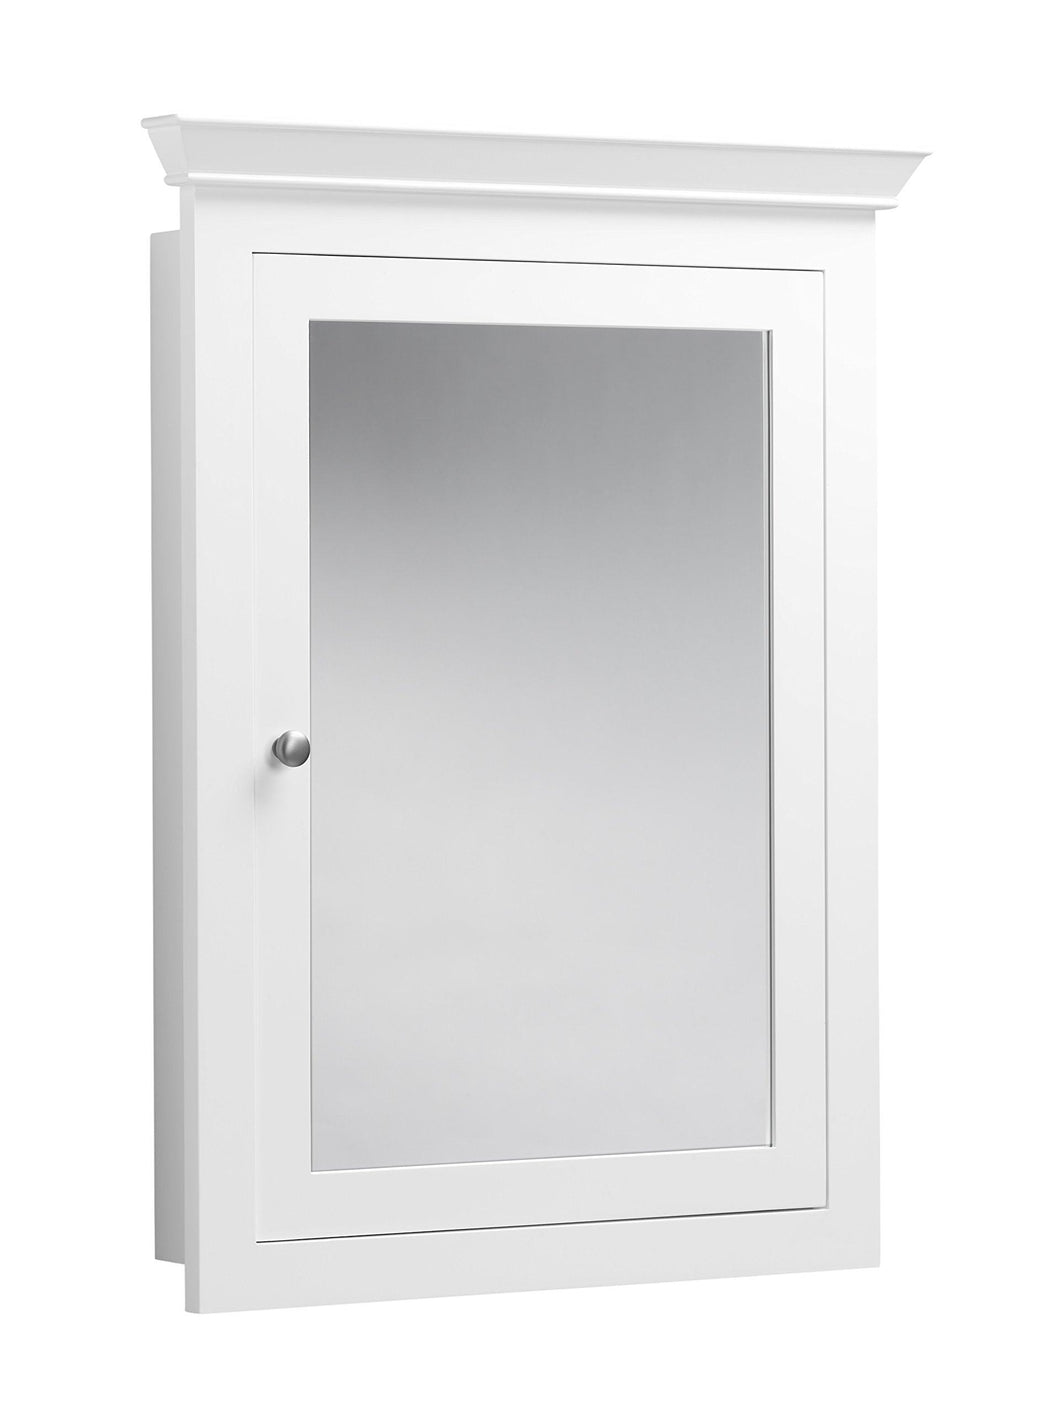 Try ronbow edward 27 x 34 transitional solid wood frame bathroom medicine cabinet with 2 mirrors and 2 cabinet shelves in white 617026 w01